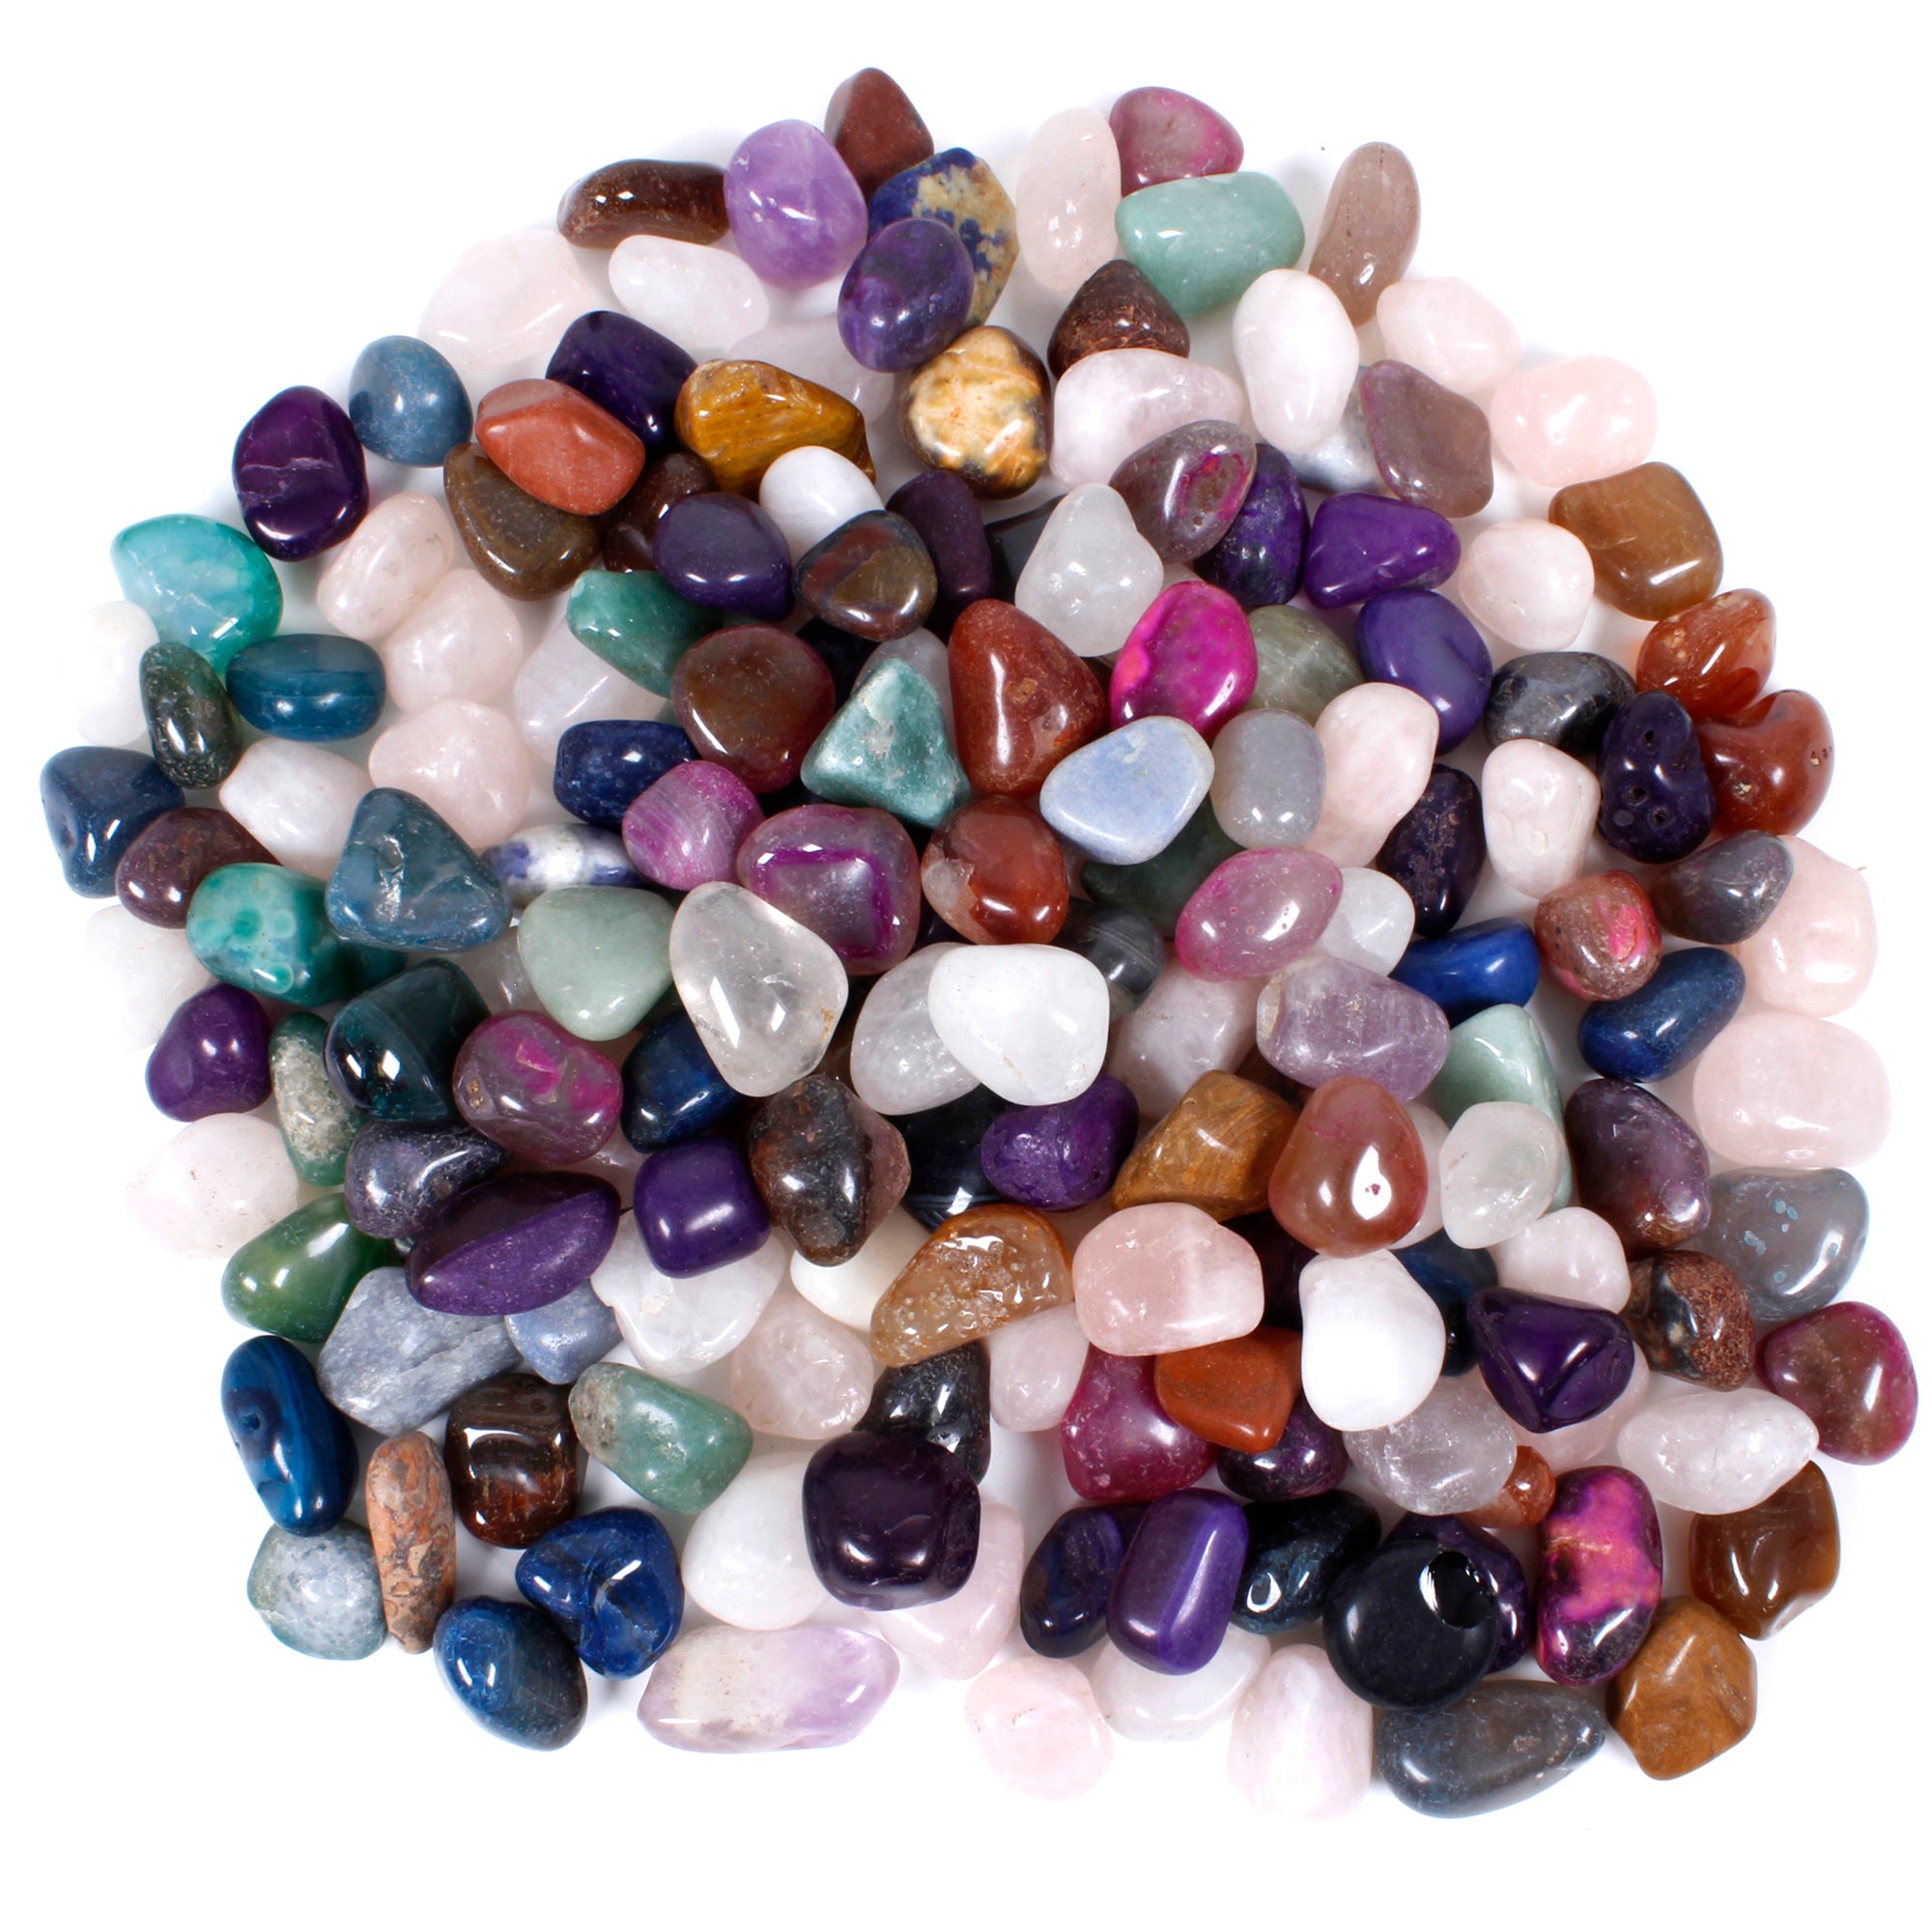 DANCING BEAR 2 Pounds Tumbled Polished Natural Gem Stones + 24 Page Rock &  Mineral Book. Average Stone Size ¾ inch. Choose 1 or 2 pounds Brand